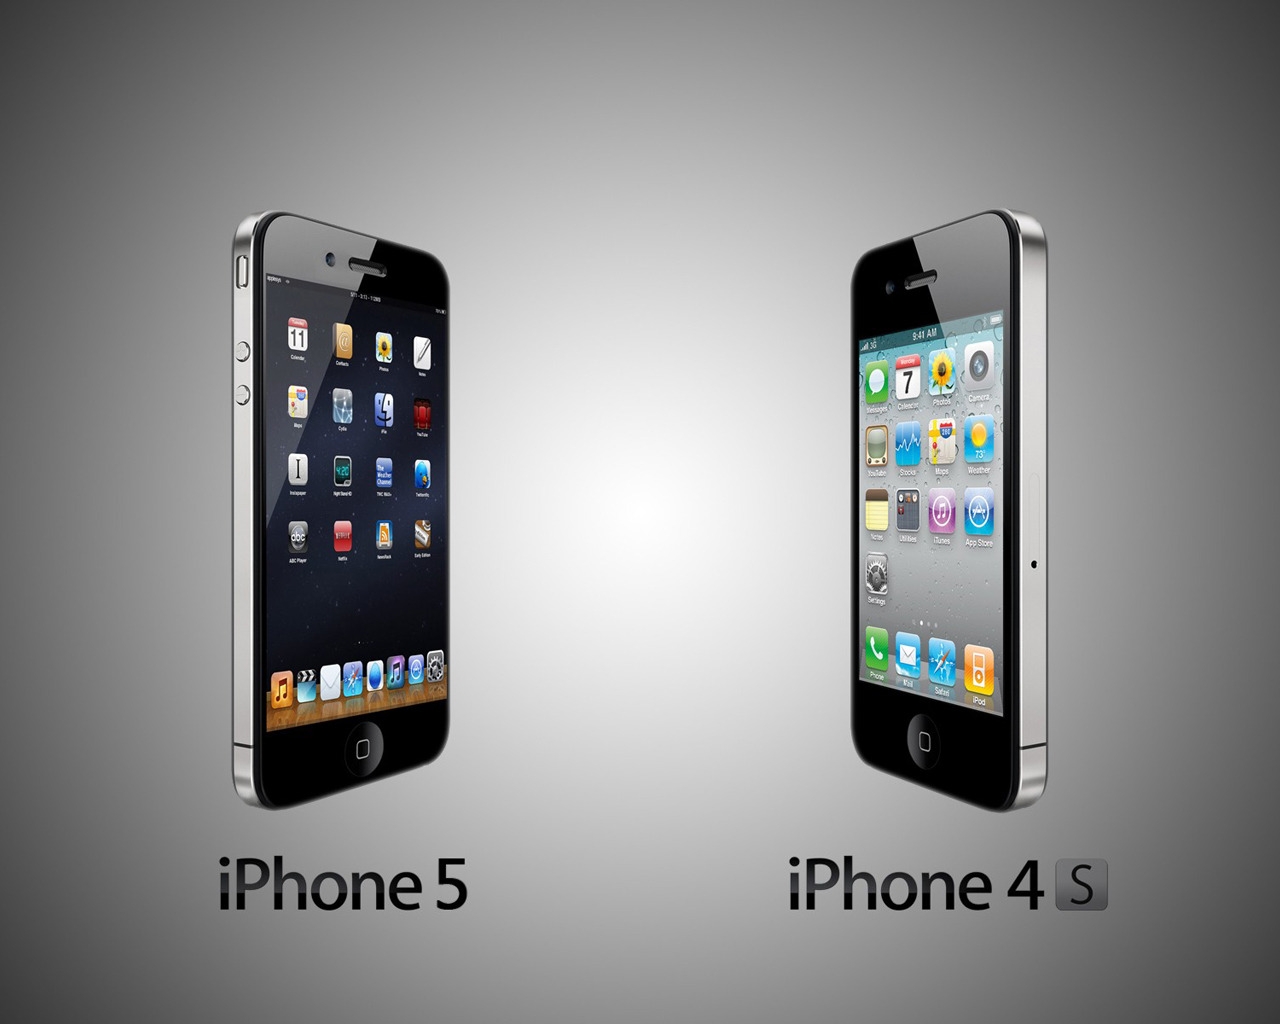 iPhone 4S and iPhone 5 for 1280 x 1024 resolution